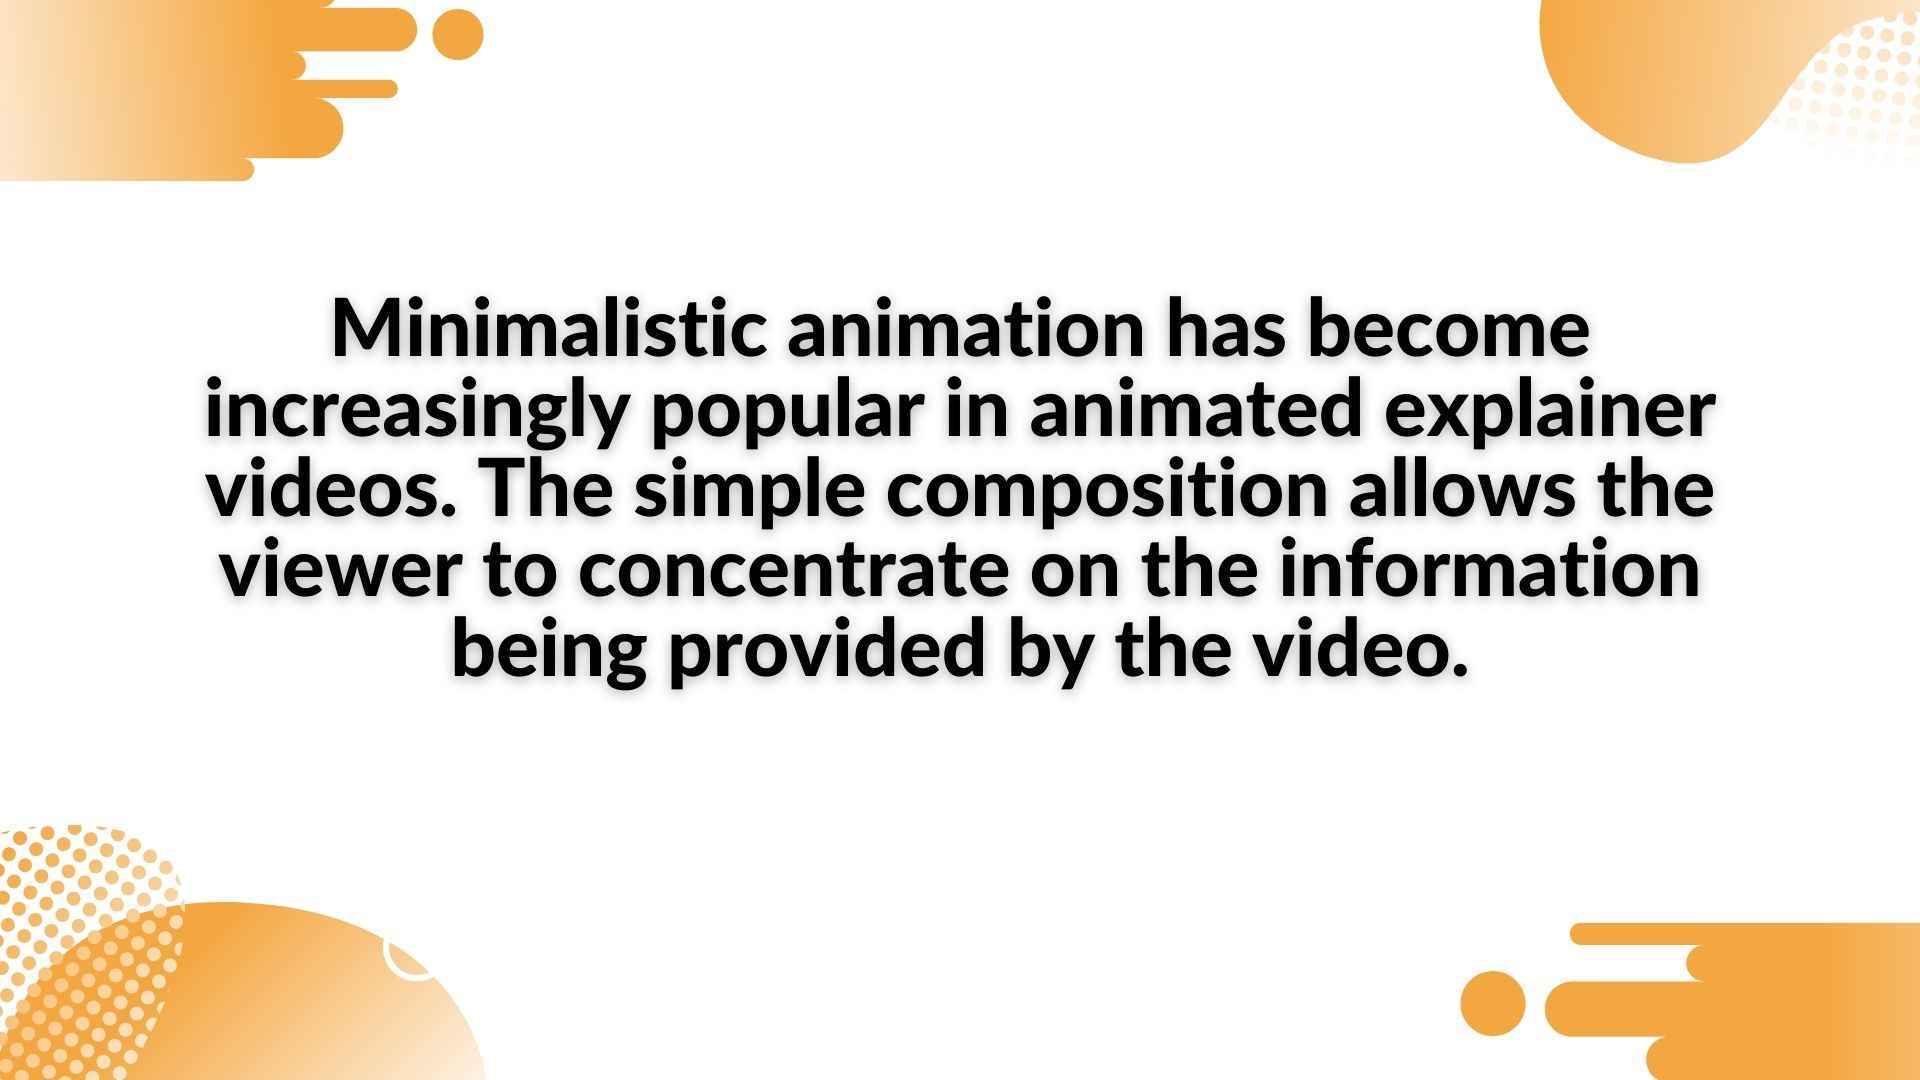 Minimalistic animation has become increasingly popular in animated explainer videos - trends in the world of animation